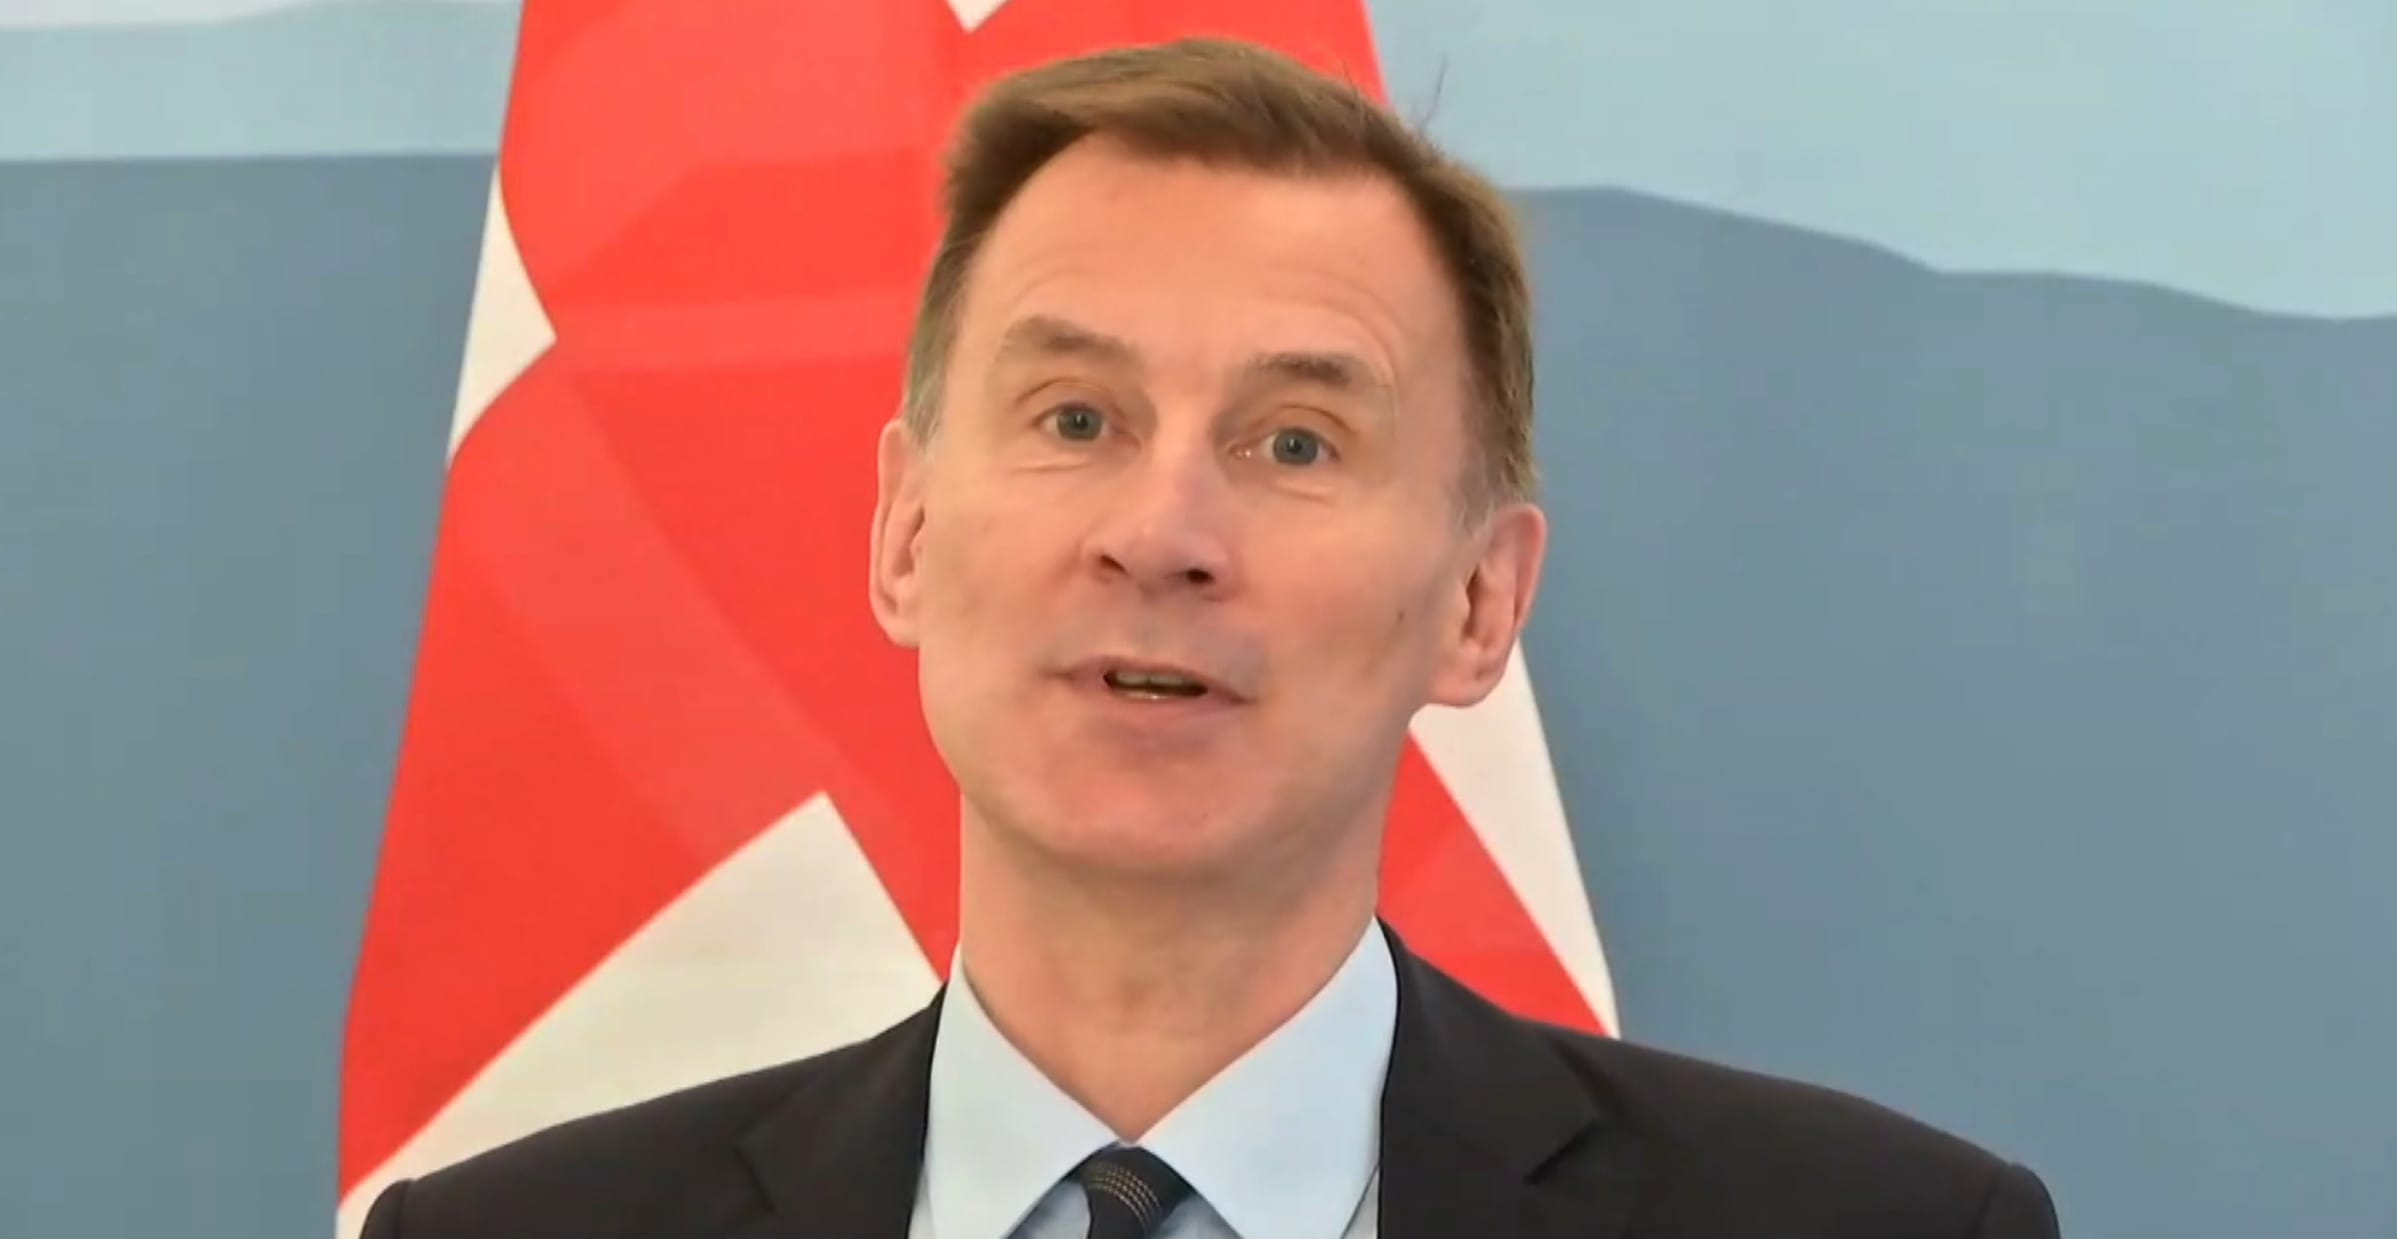 UK and Switzerland's post-Brexit deal a 'blueprint' for other countries: Hunt